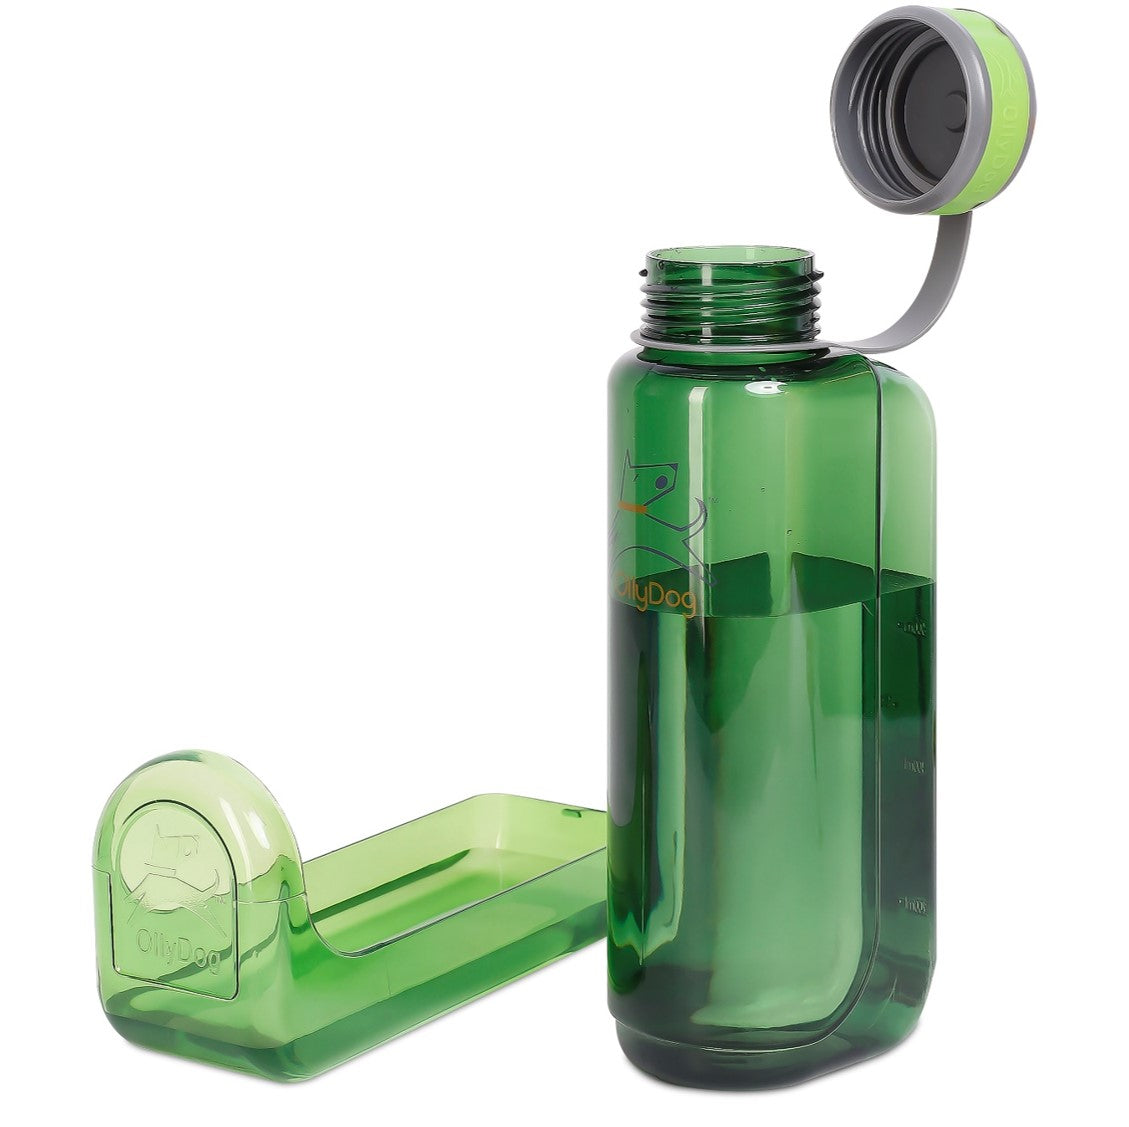 OllyBottle in Grass | Water Sharing System